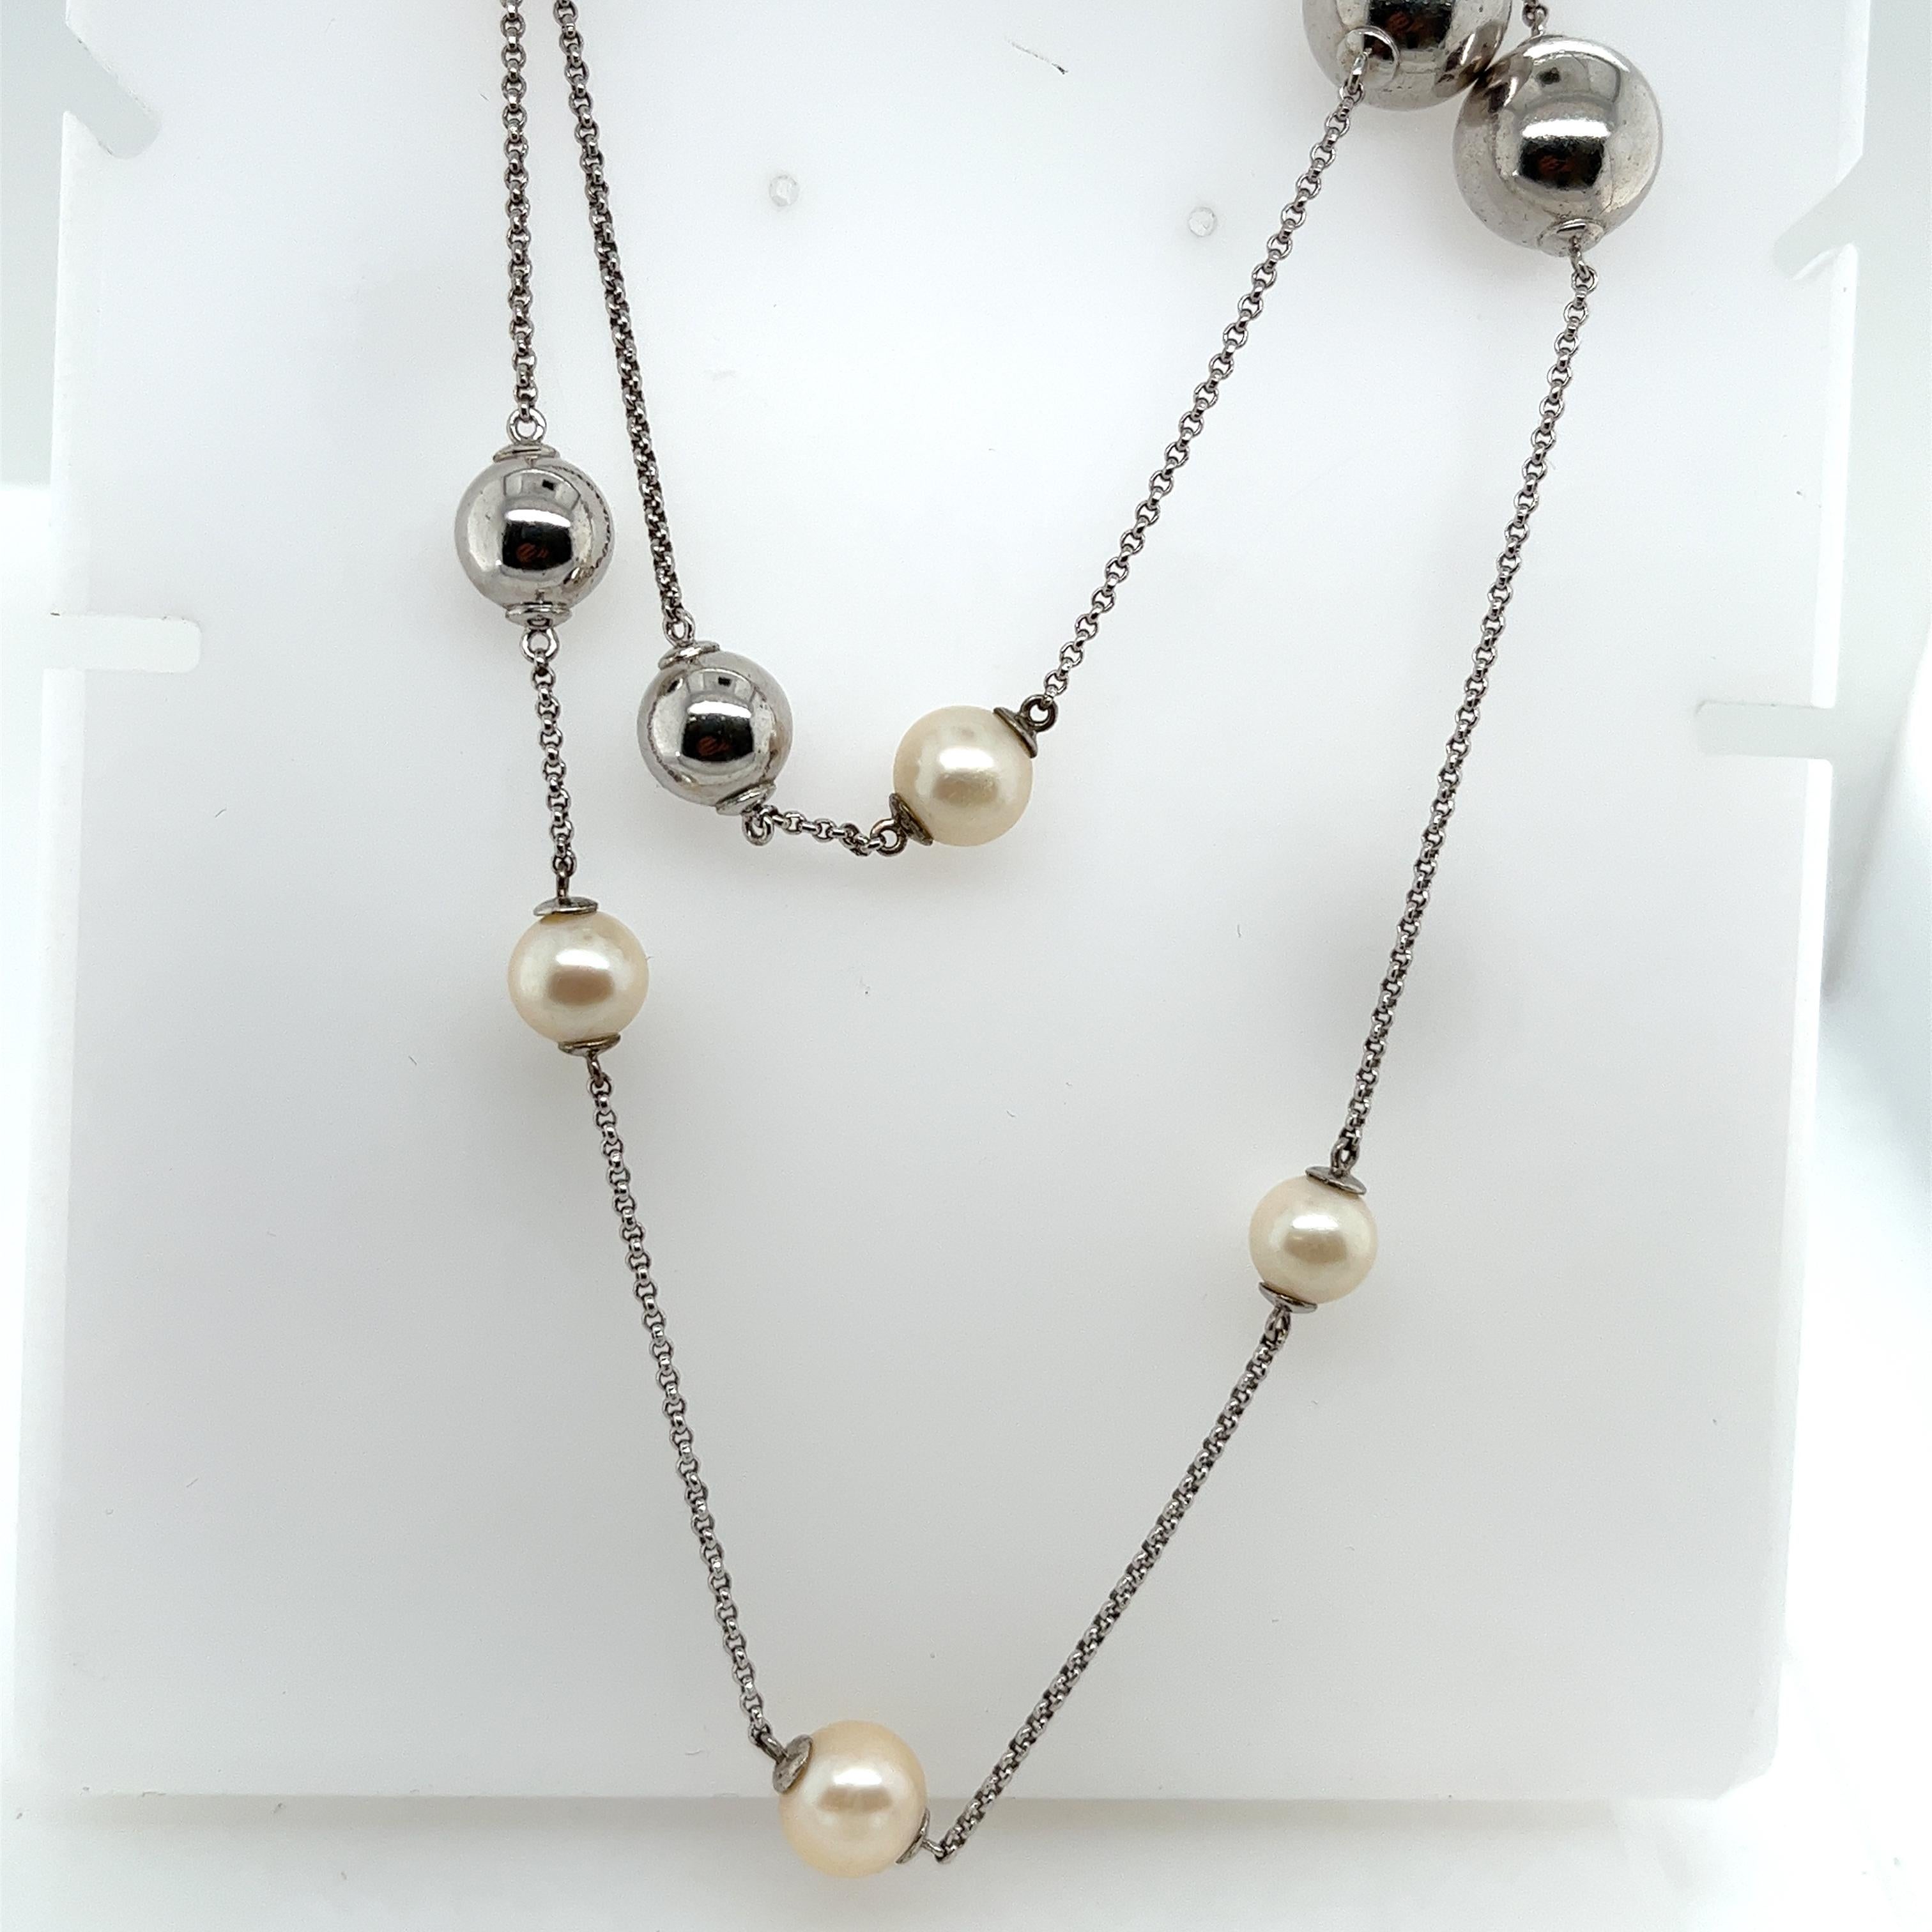 Georg Jensen - Freshwater Pearl Sterling Silver Necklace 56 inches In Excellent Condition For Sale In London, GB